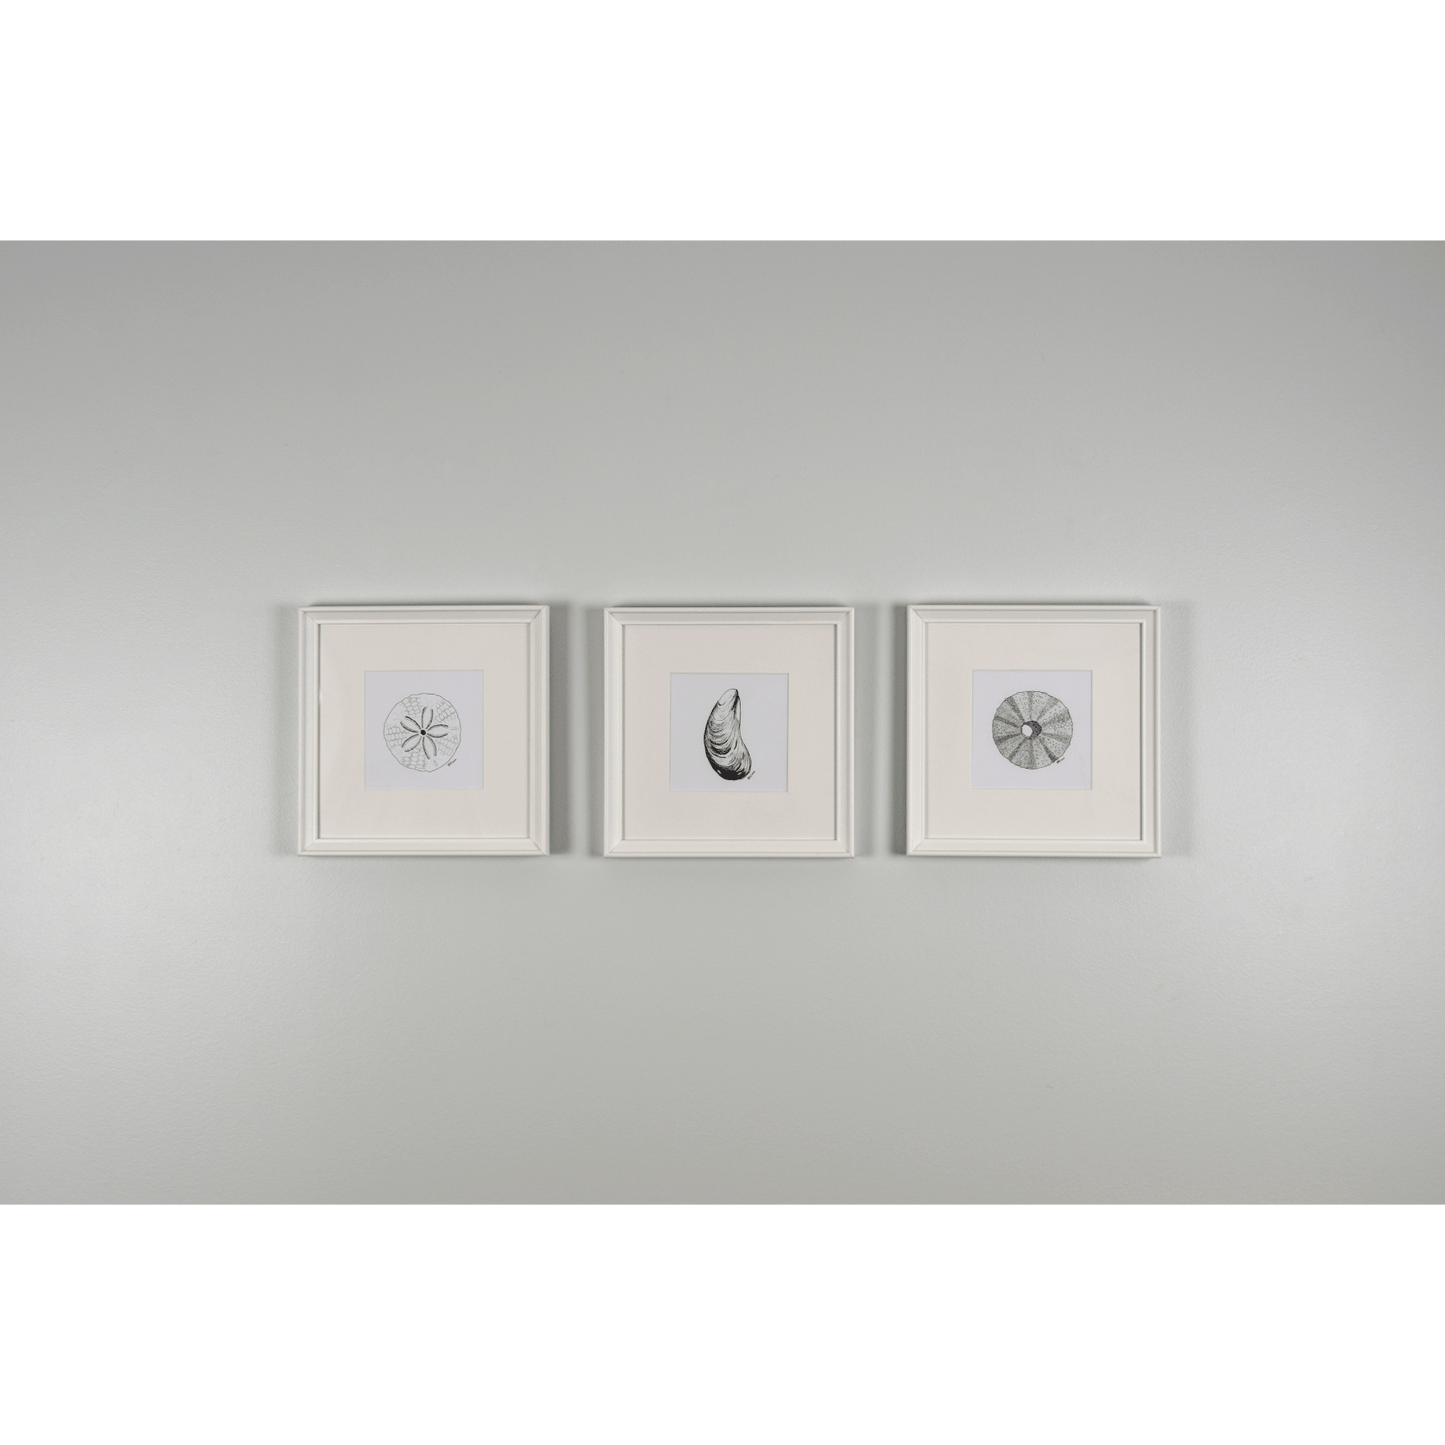 "Beach Finds - Urchin, Sand dollar, Mussel" reproduction print  from a pen and ink original is perfect for adding a touch of coastal charm to any room. 